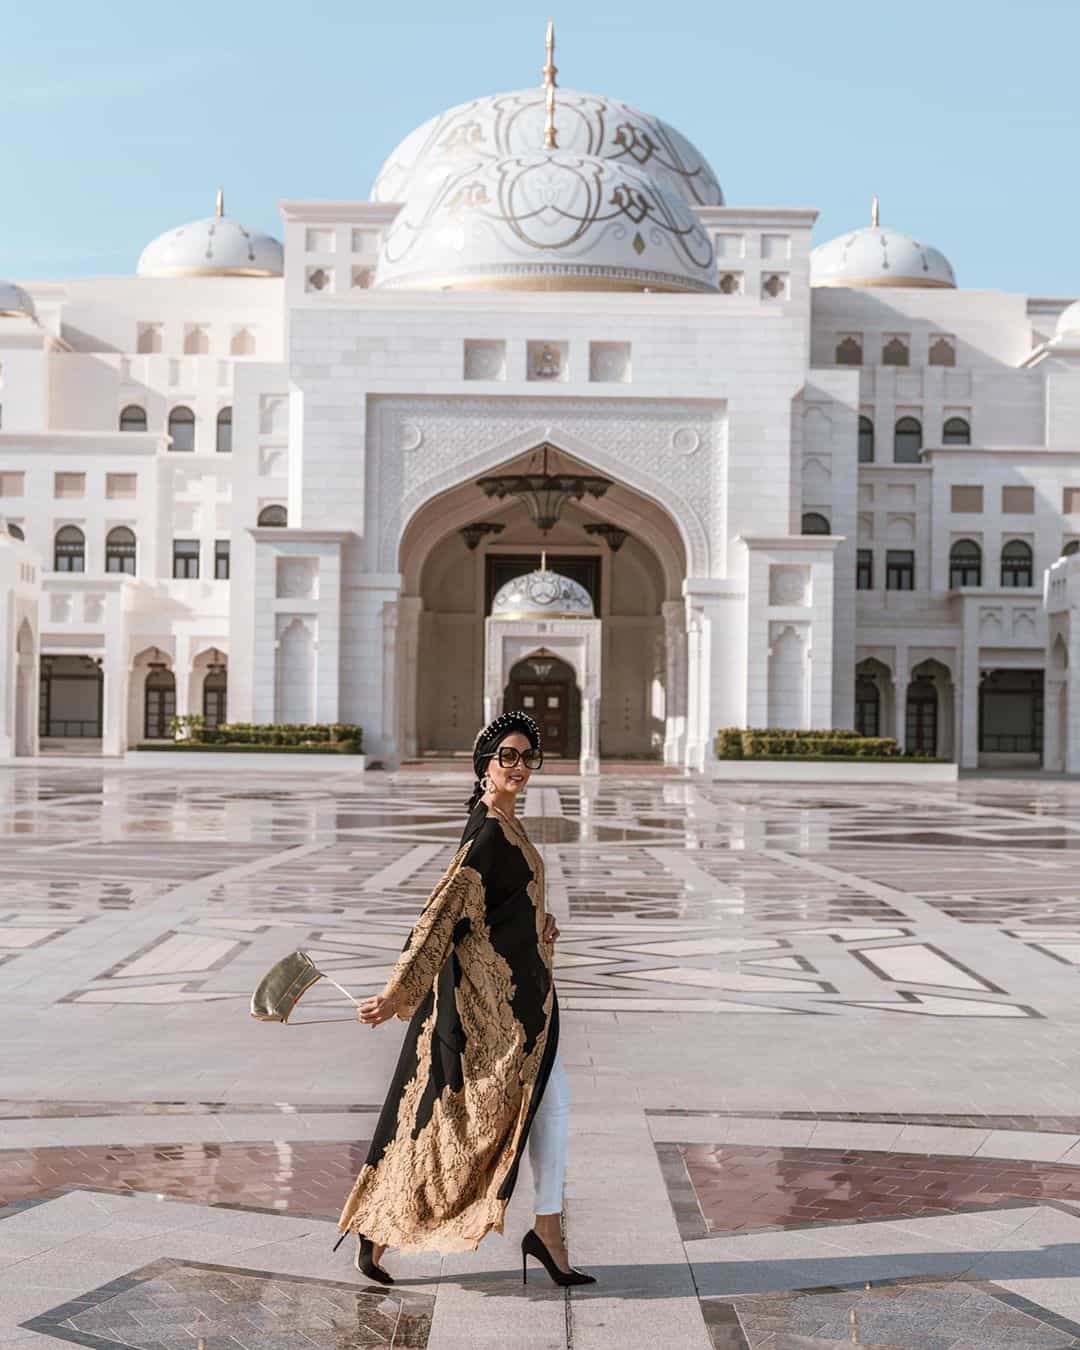 Book Your Abu Dhabi Photo Tour Today And Capture The Beauty Of This Amazing City With Our Expert Photographer. Explore The Best Photography Spots. Contact Us!